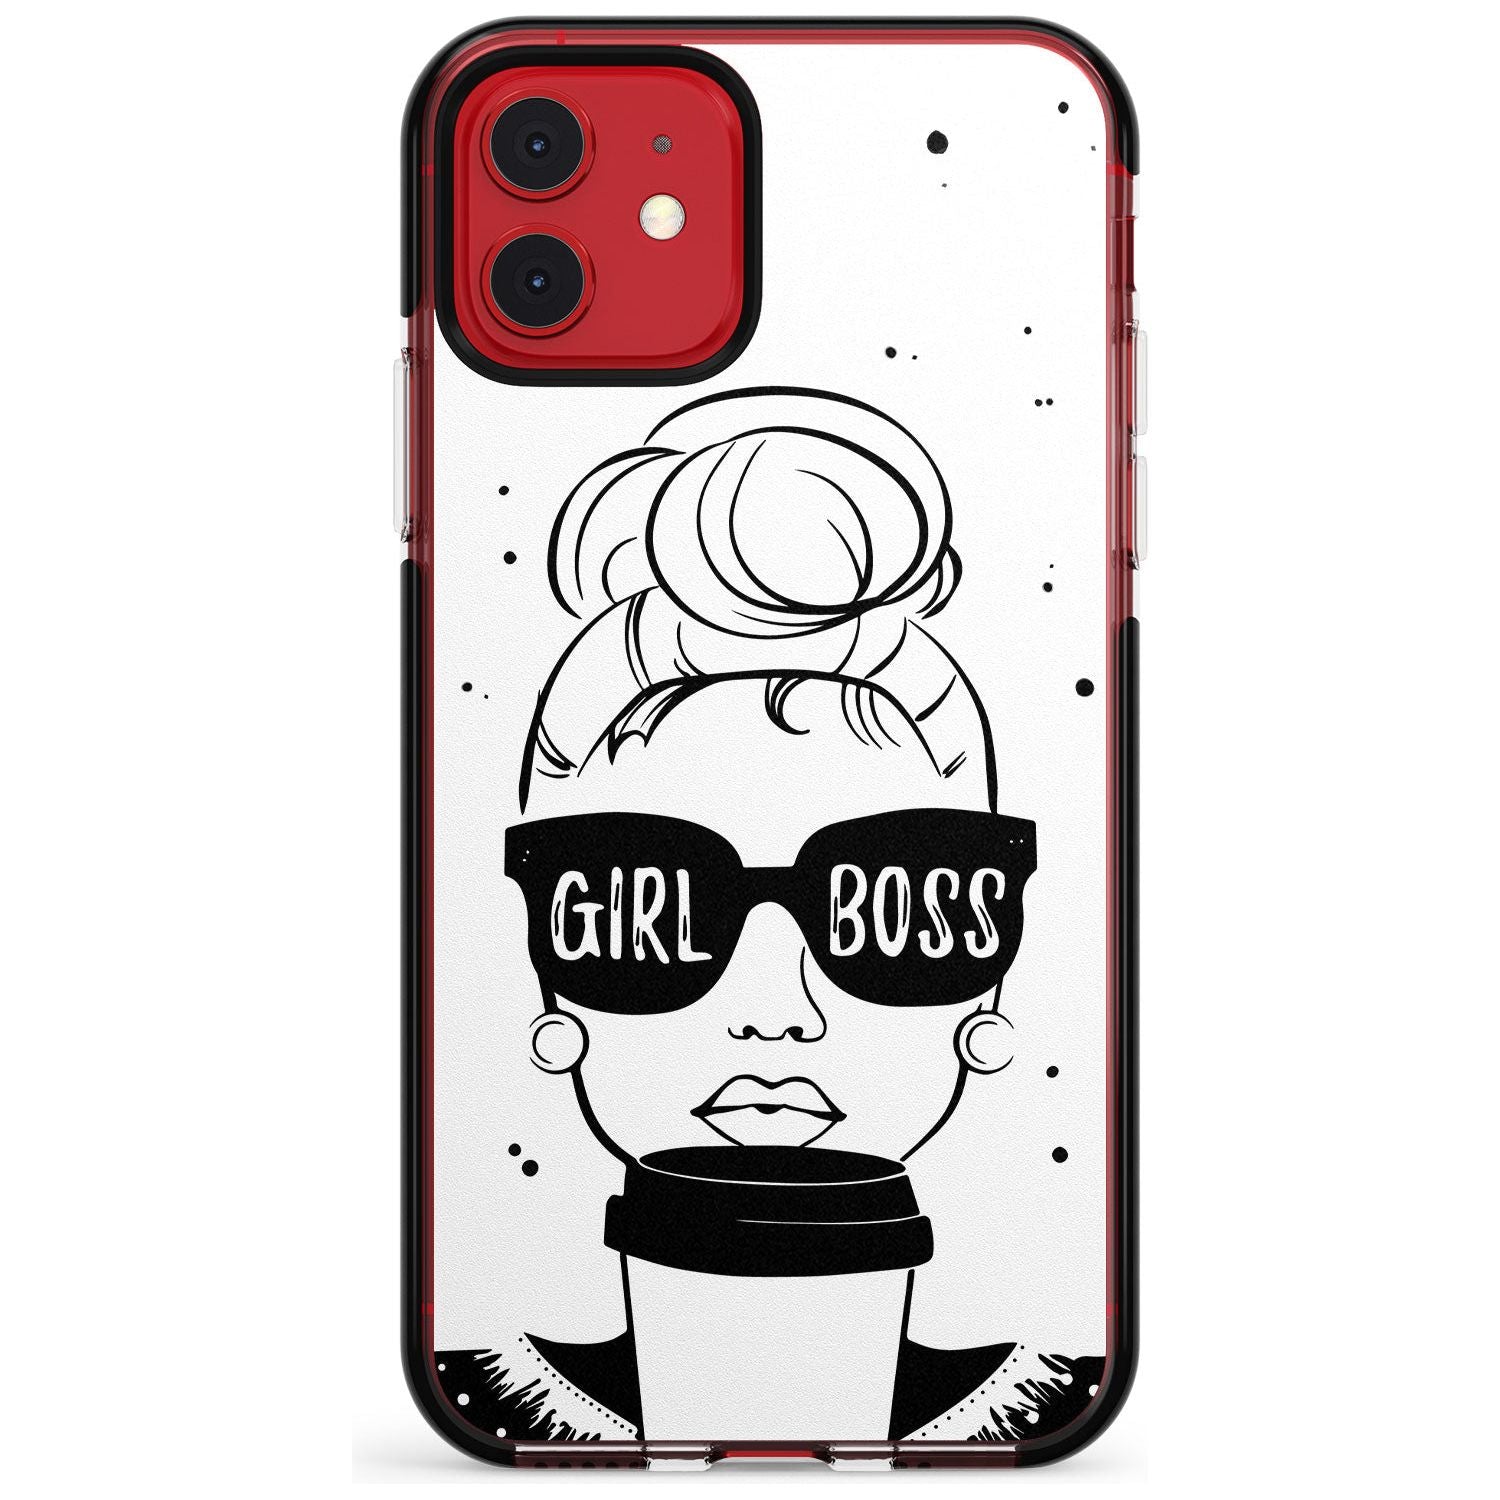 Girl Boss Black Impact Phone Case for iPhone 11 Pro Max